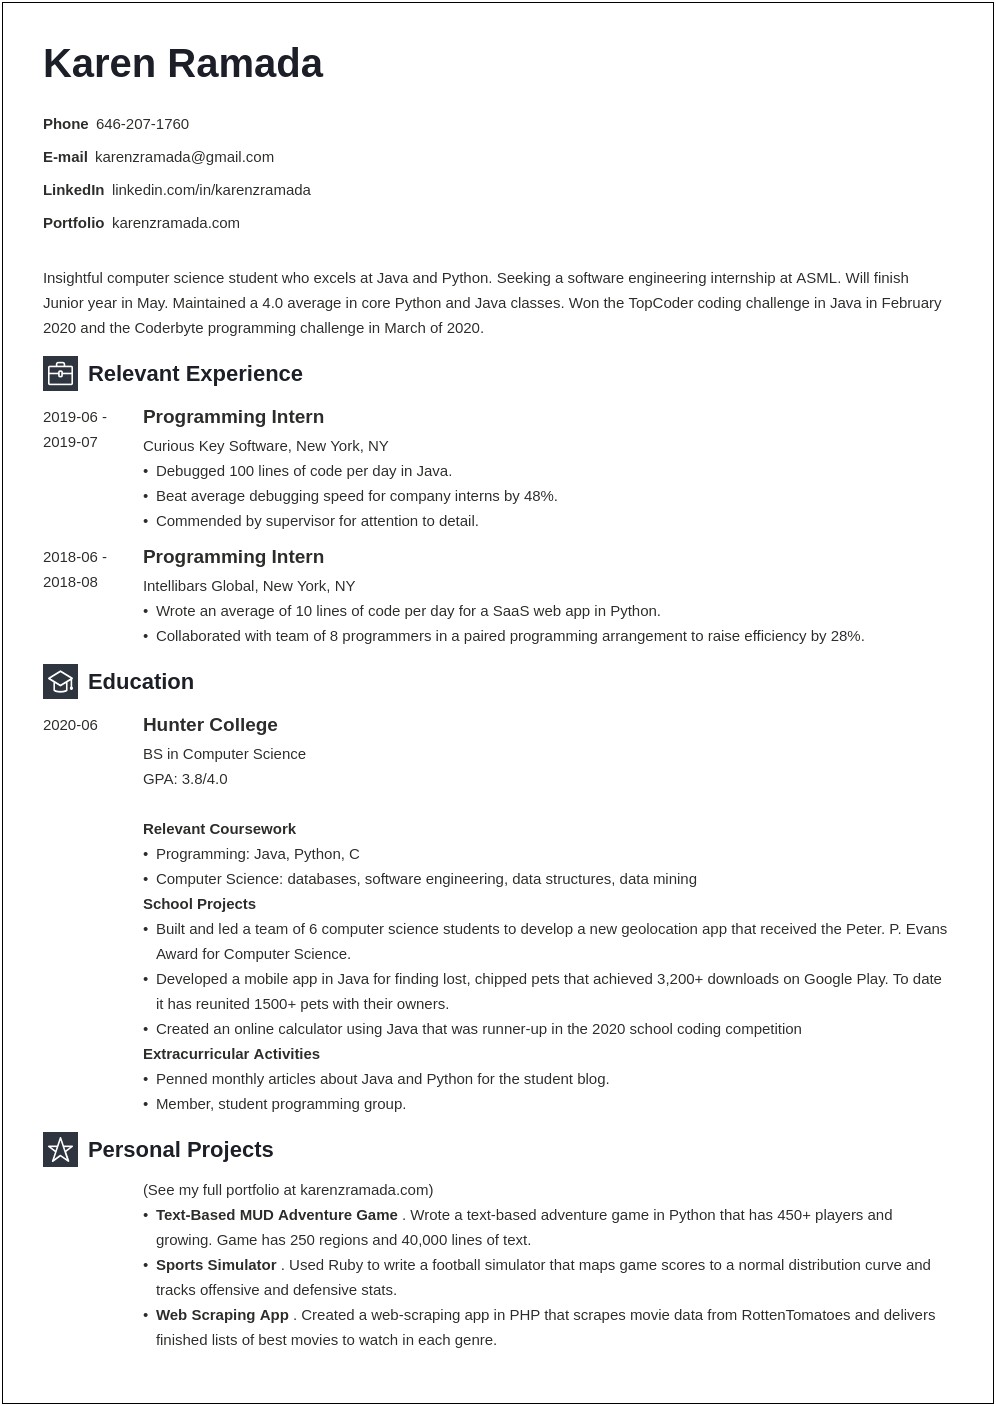 Resume Format For Bca Freshers In Ms Word